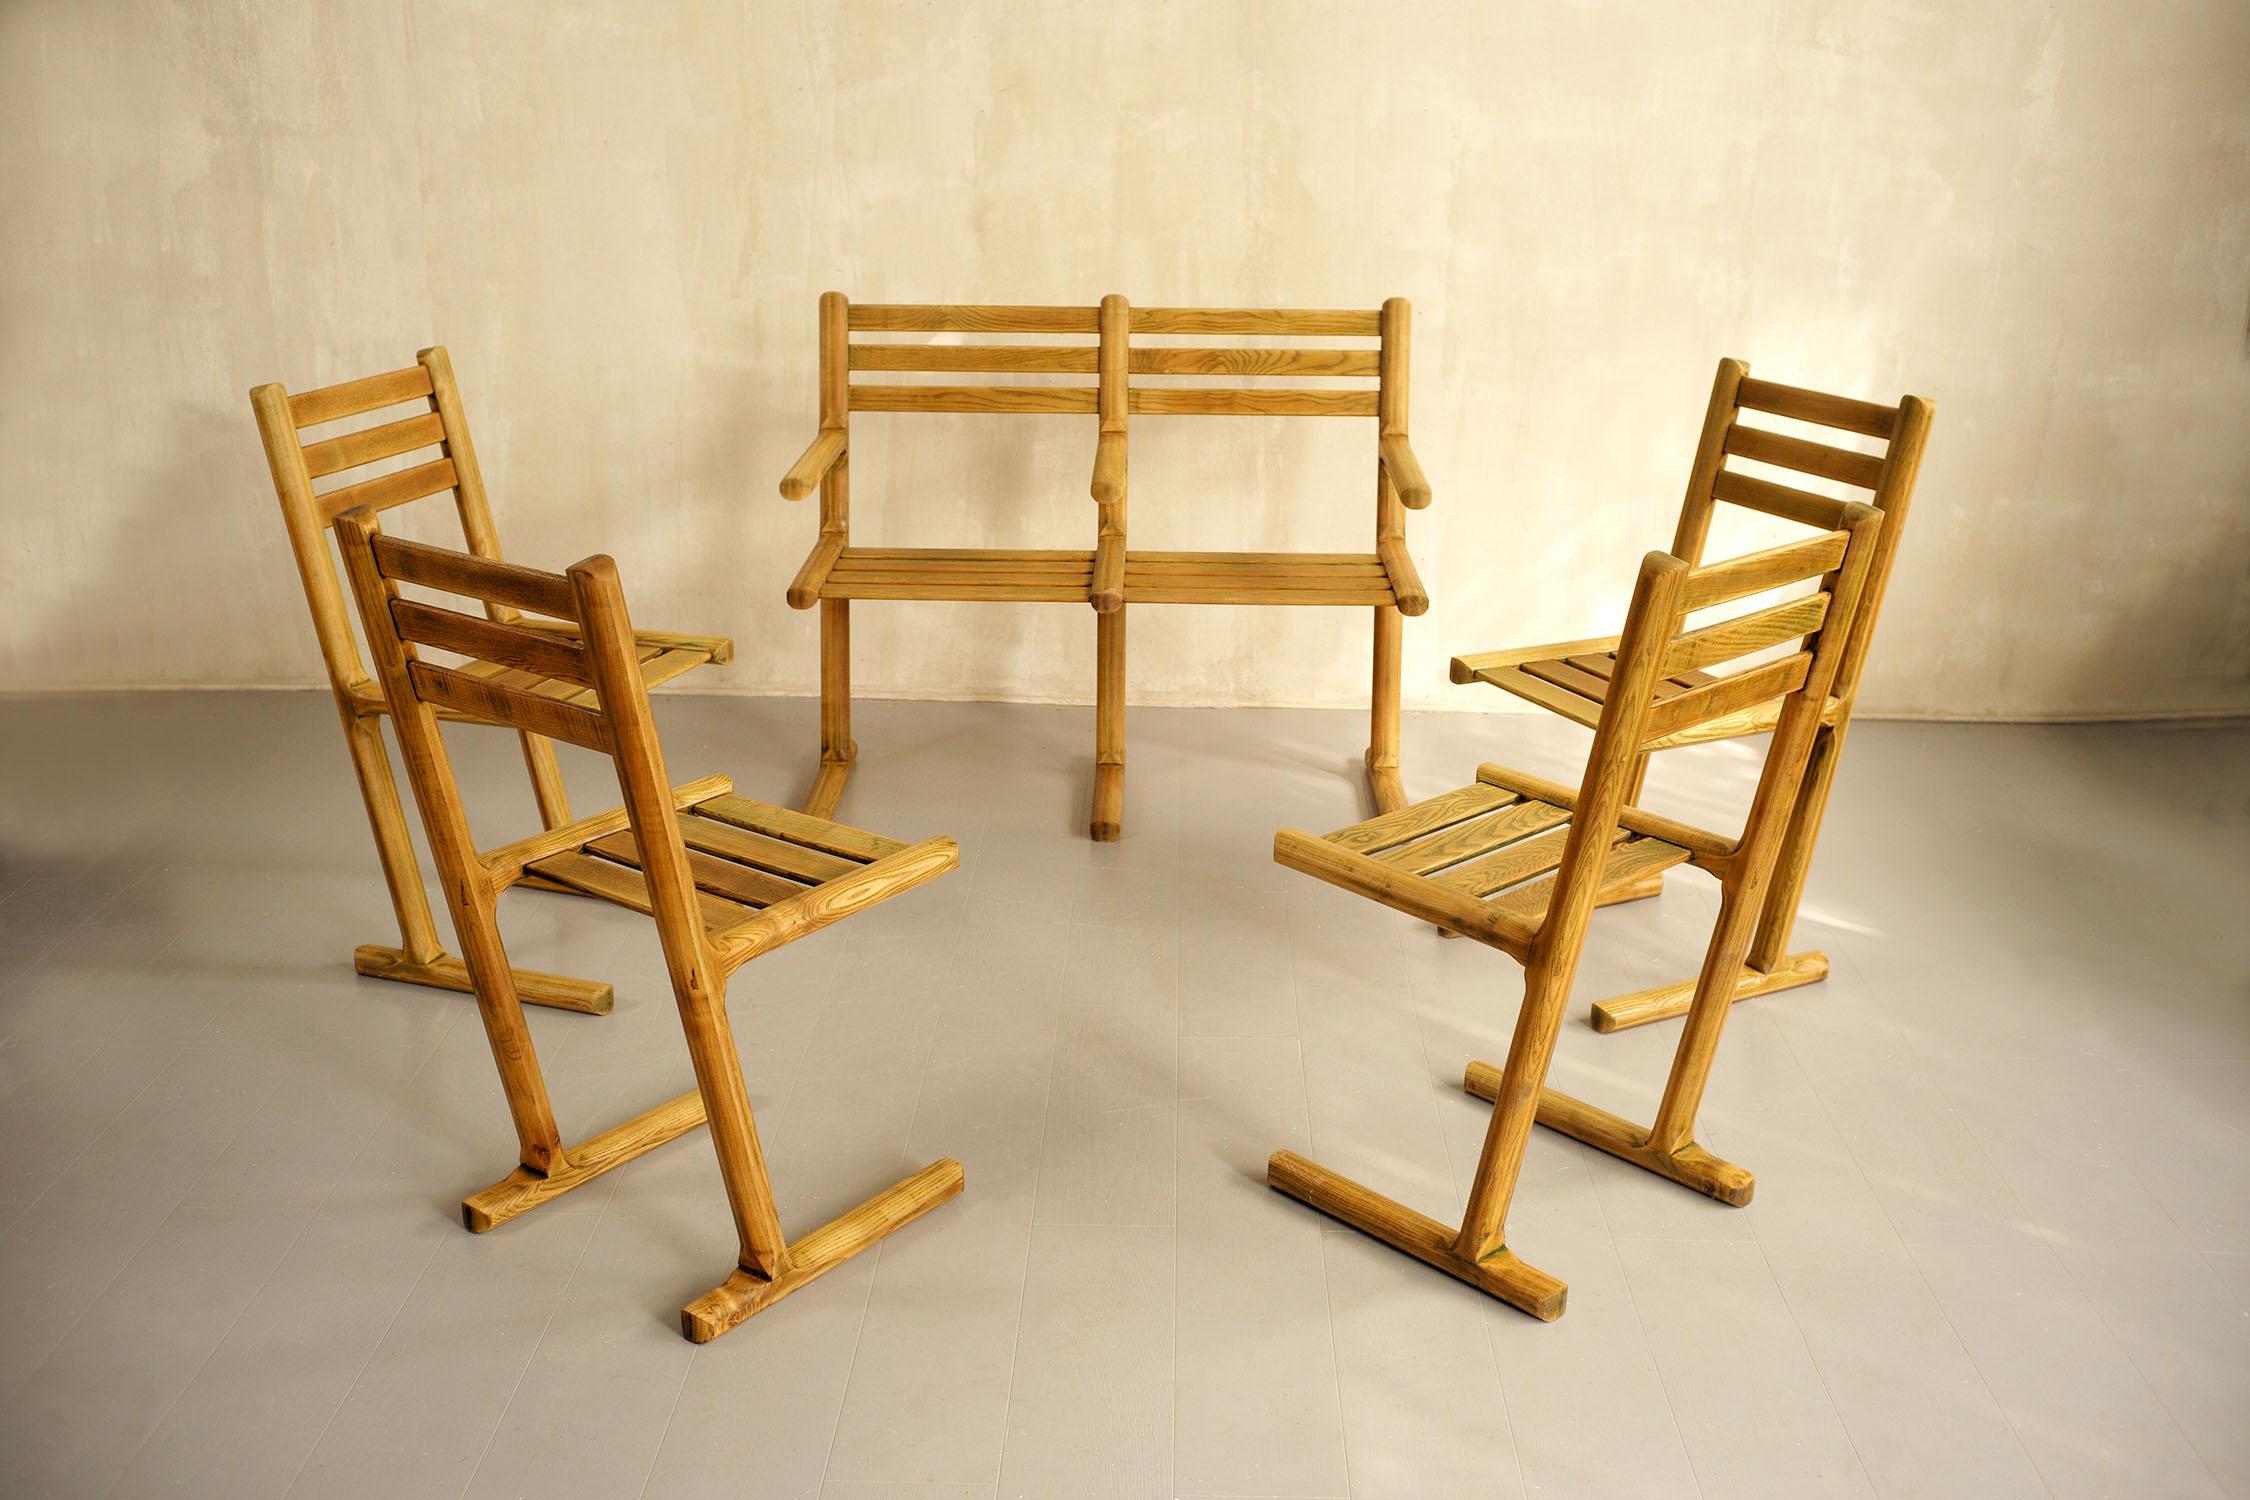 Set of 4 Chairs and 1 Wooden Bench, France, 1960 For Sale 6